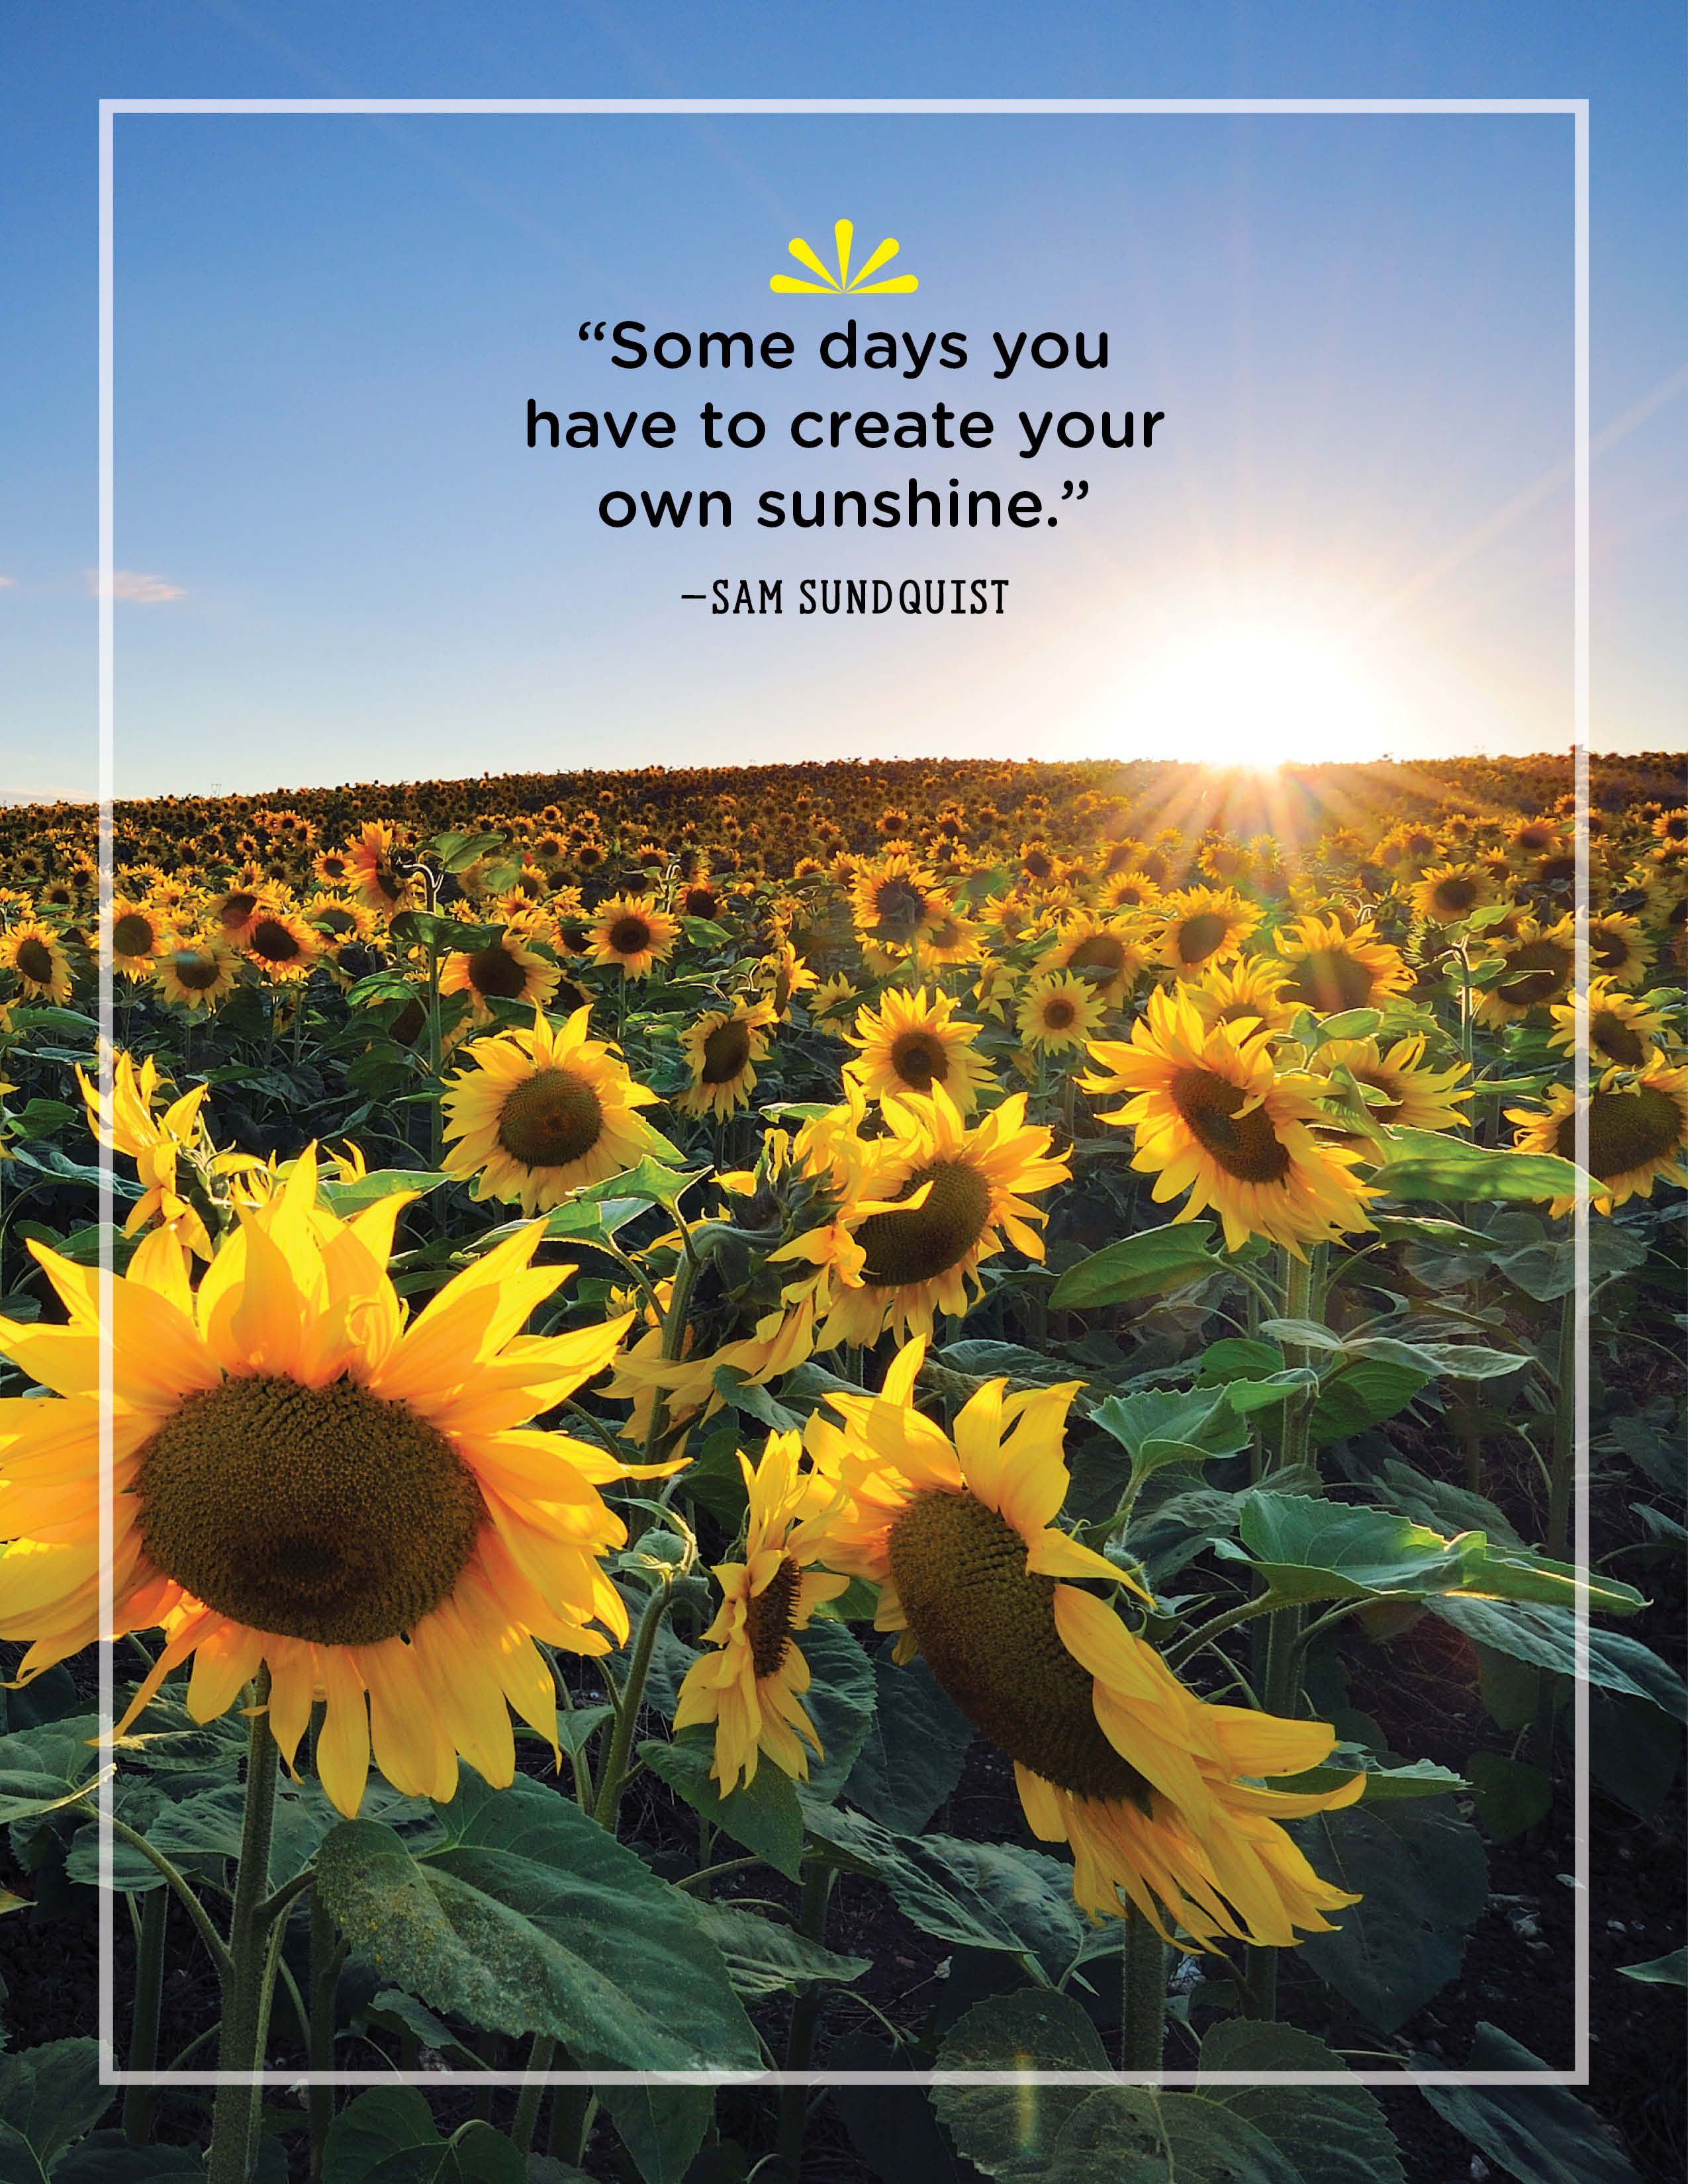 40 Best Sunshine Quotes - Wise and Inspirational Sayings About Sunshine